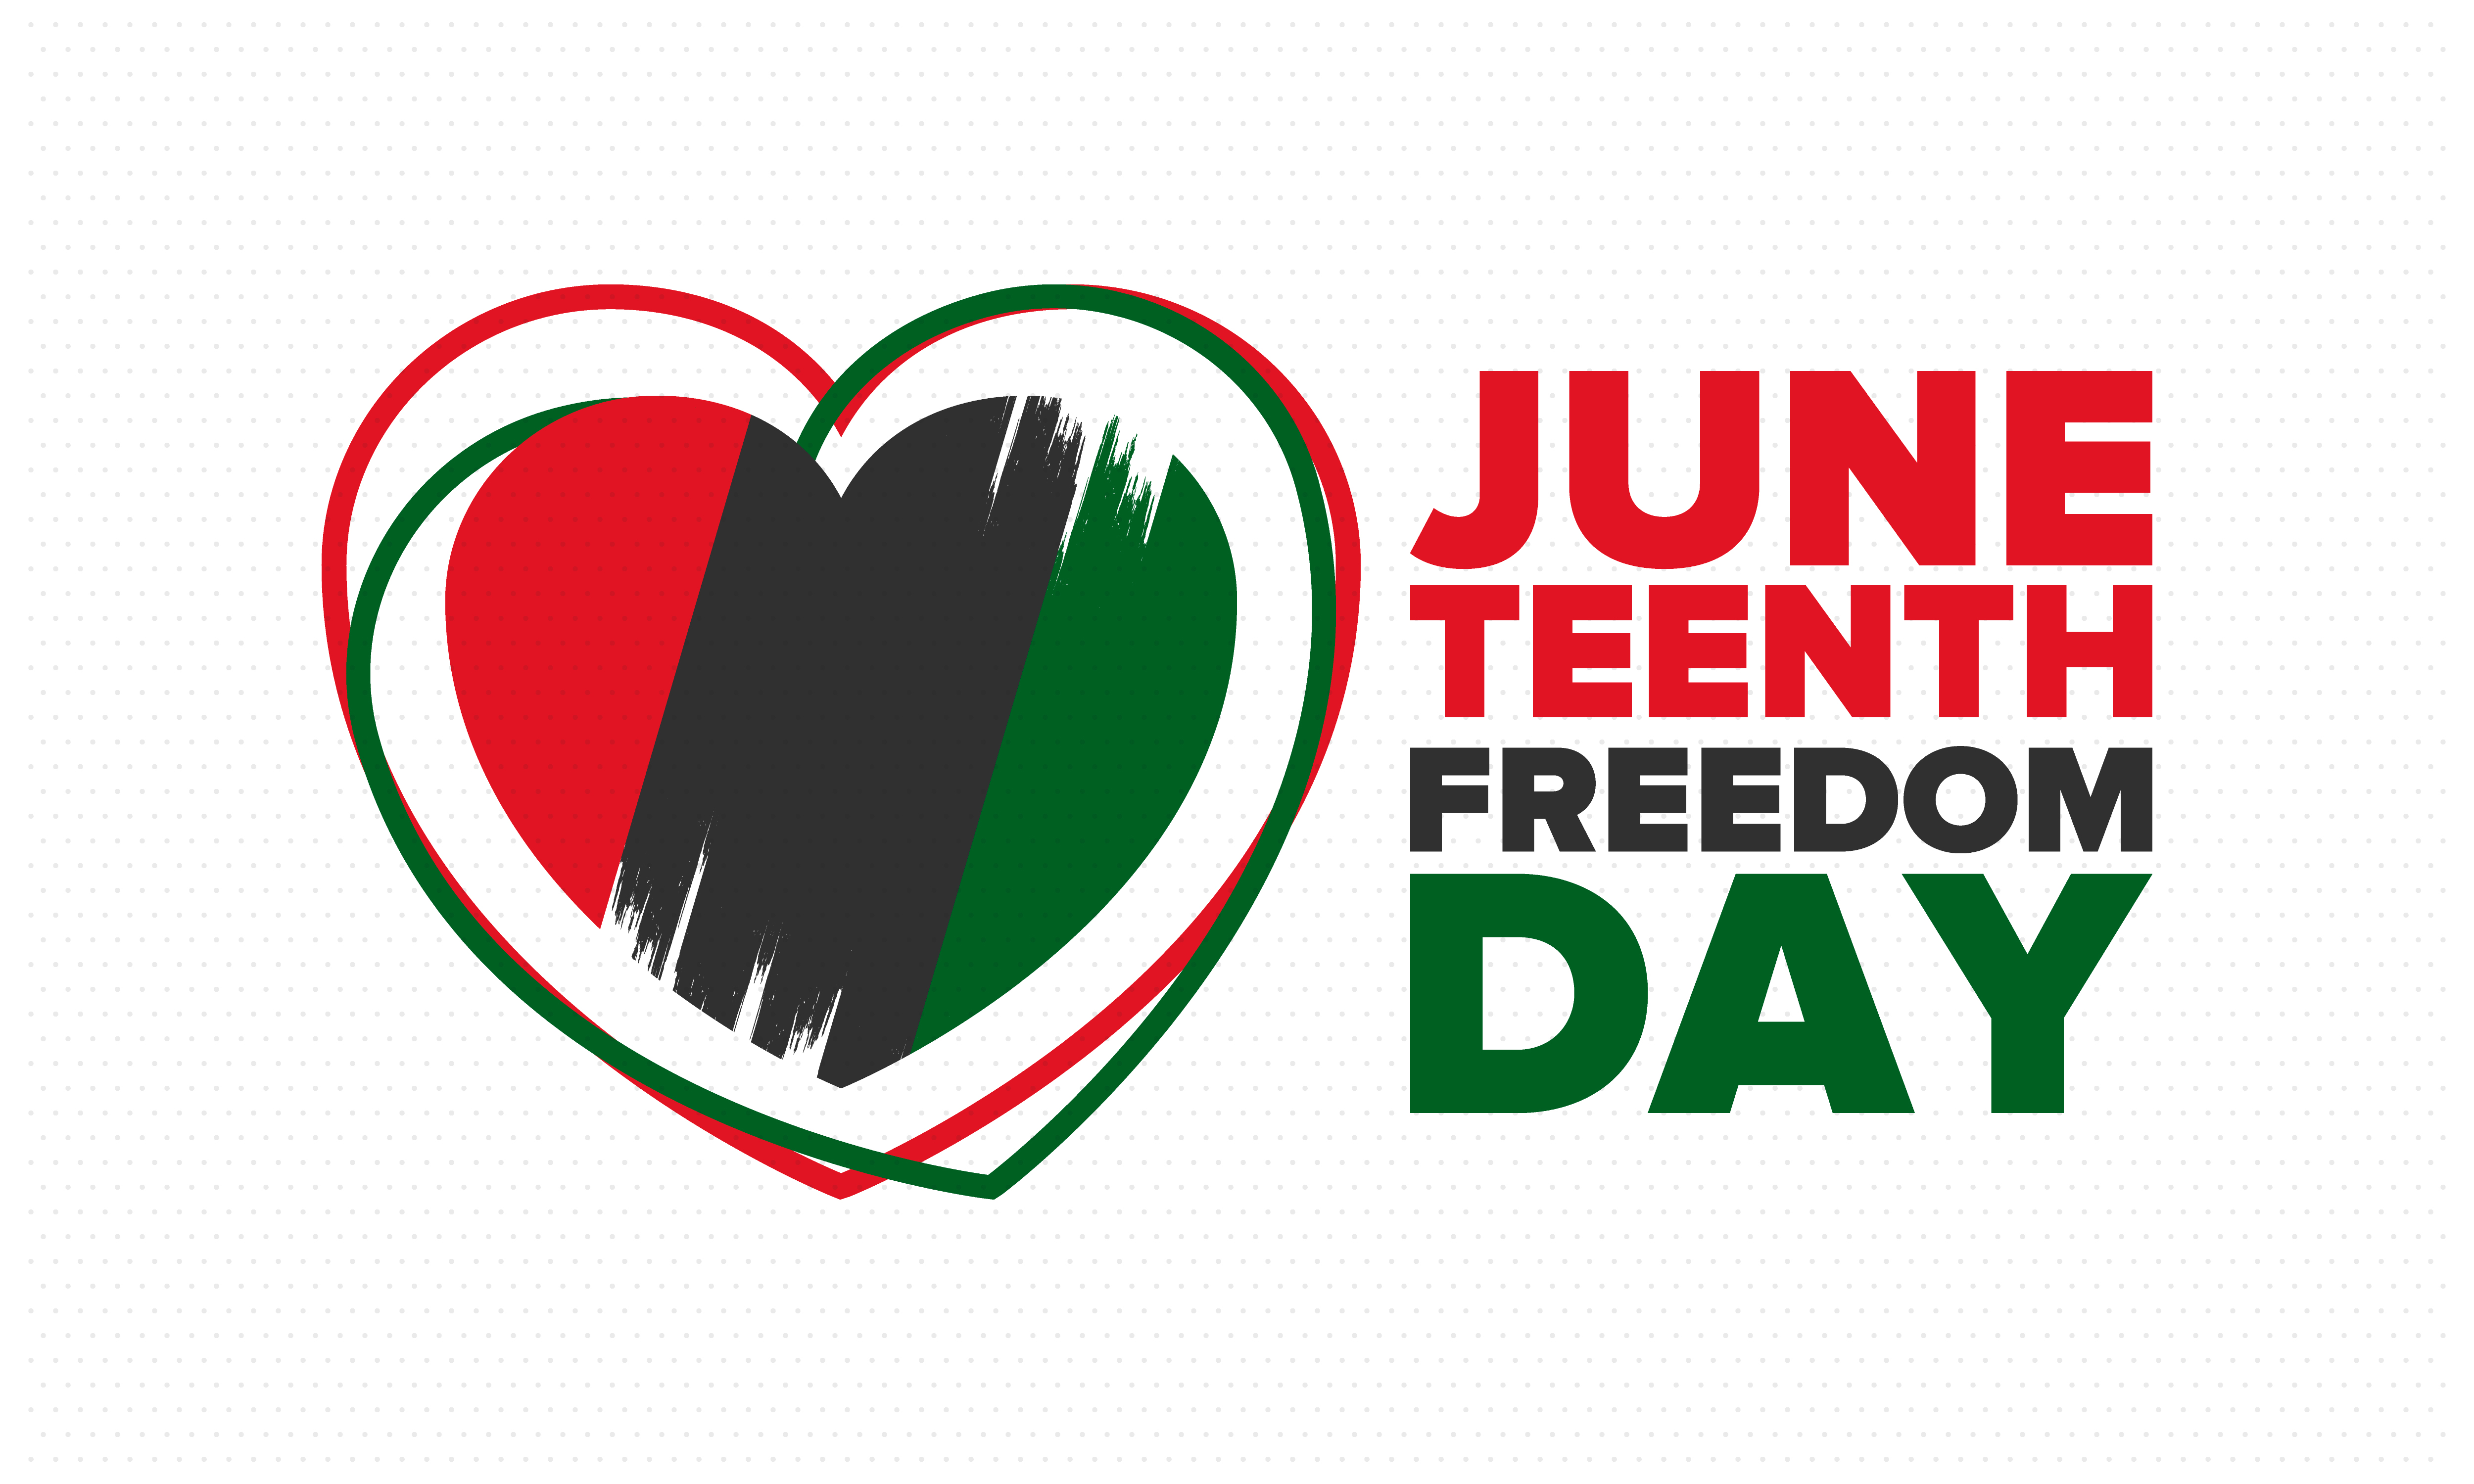 An image of red, black and green heart with Juneteenth Freedom Day written next to it